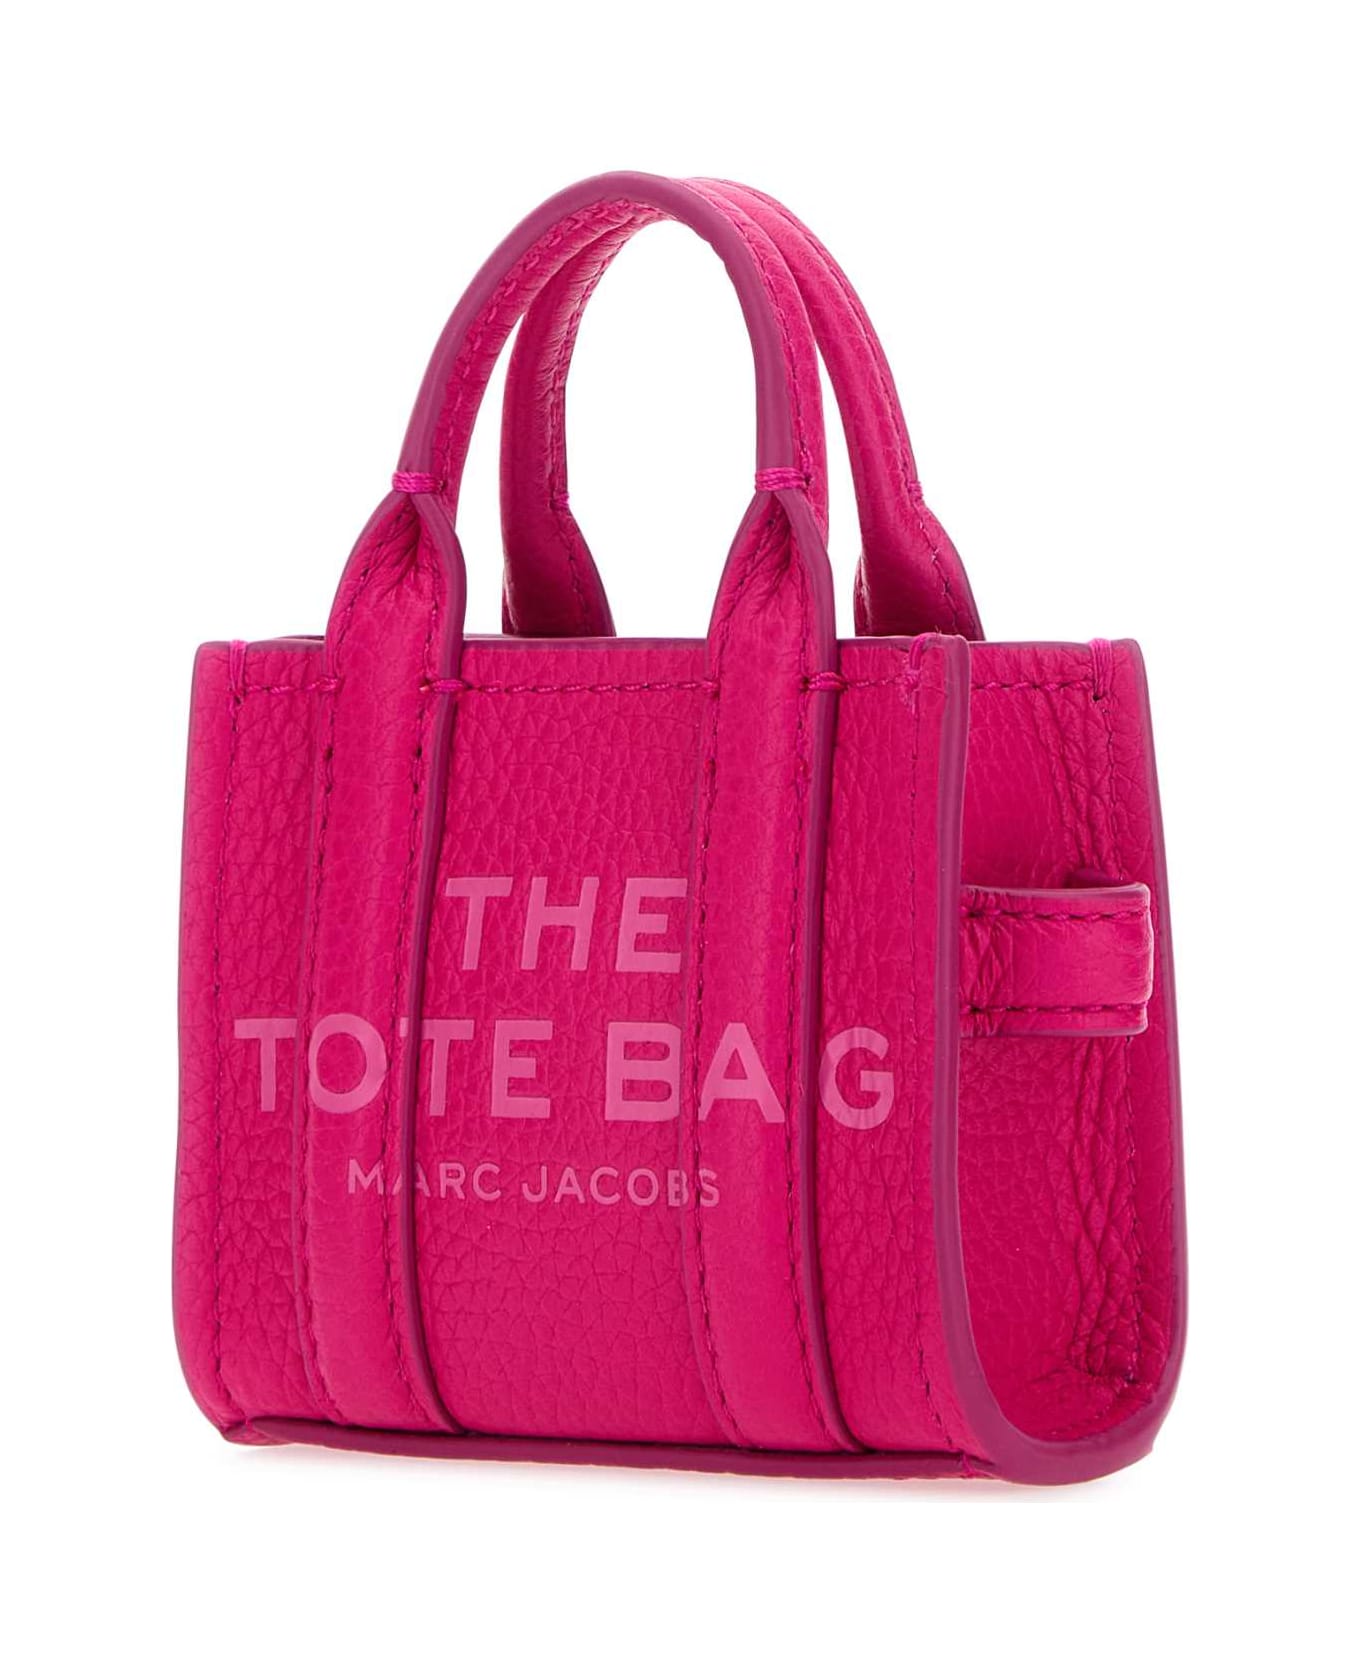 Marc Jacobs Fuchsia Leather Nano Tote Bag Charm - HOTPINK トートバッグ